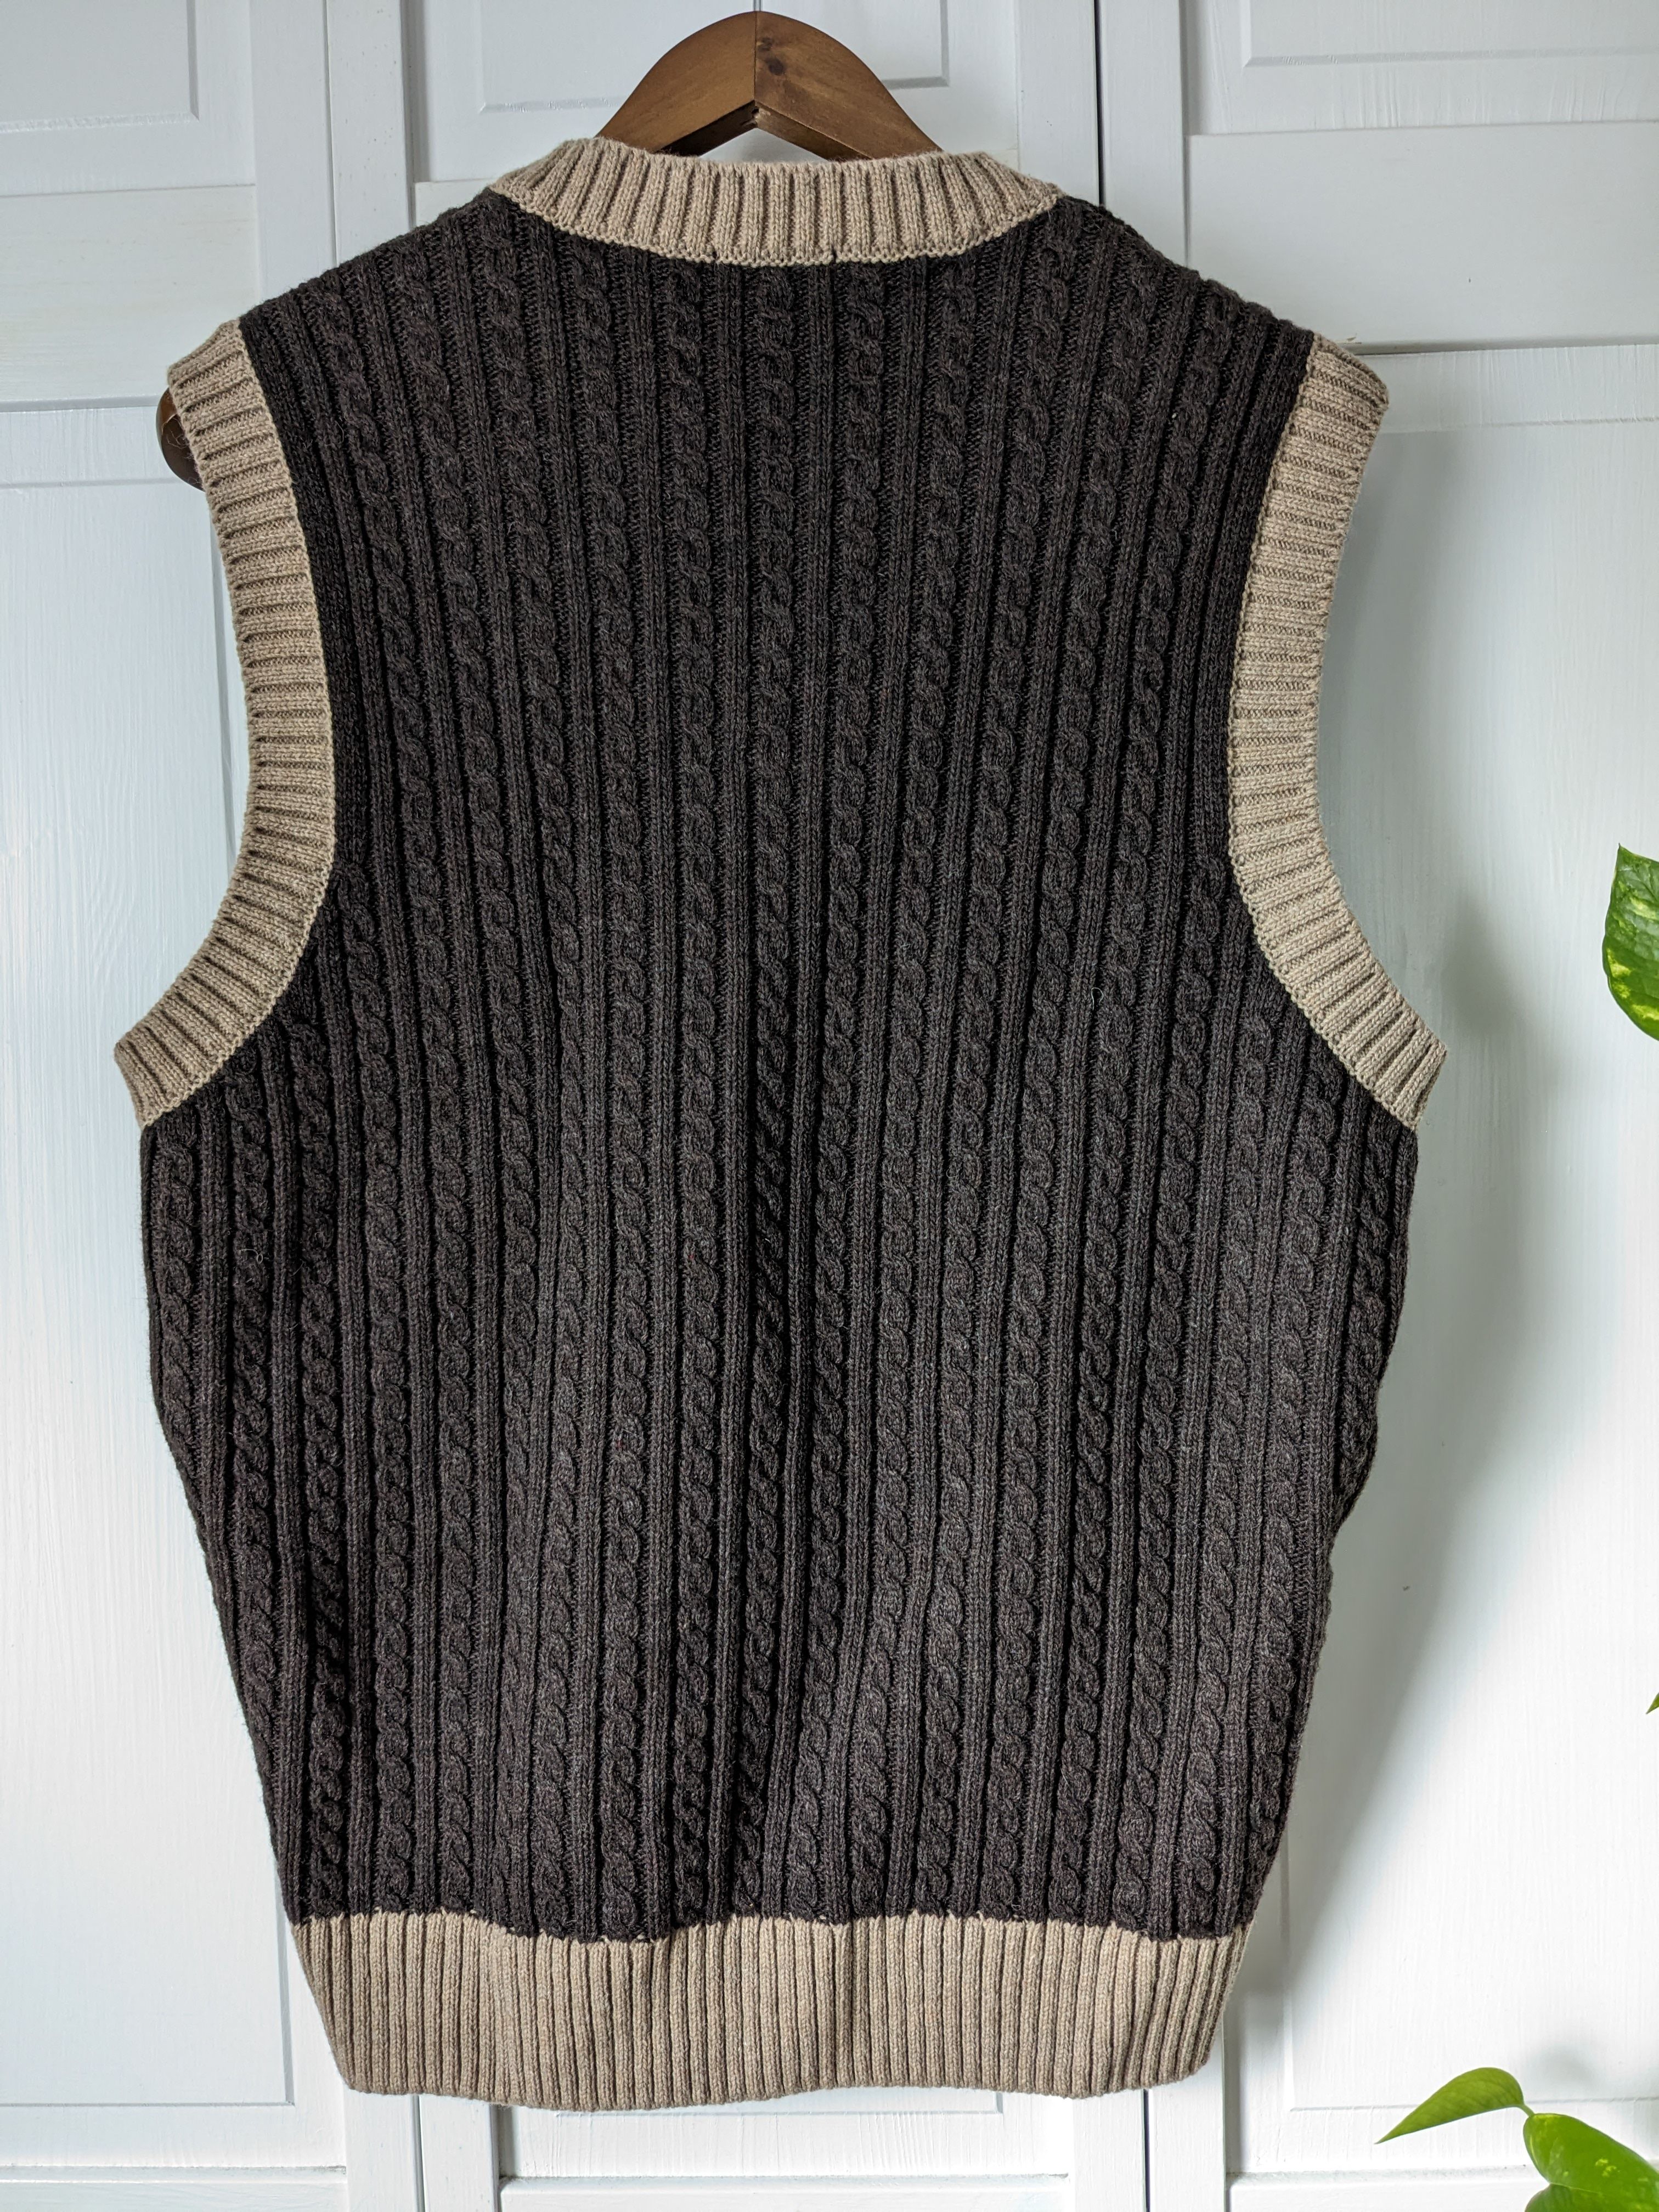 Knickerbocker Mfg Co Wool blend cable knit sweater vest Size US L / EU 52-54 / 3 - 2 Preview